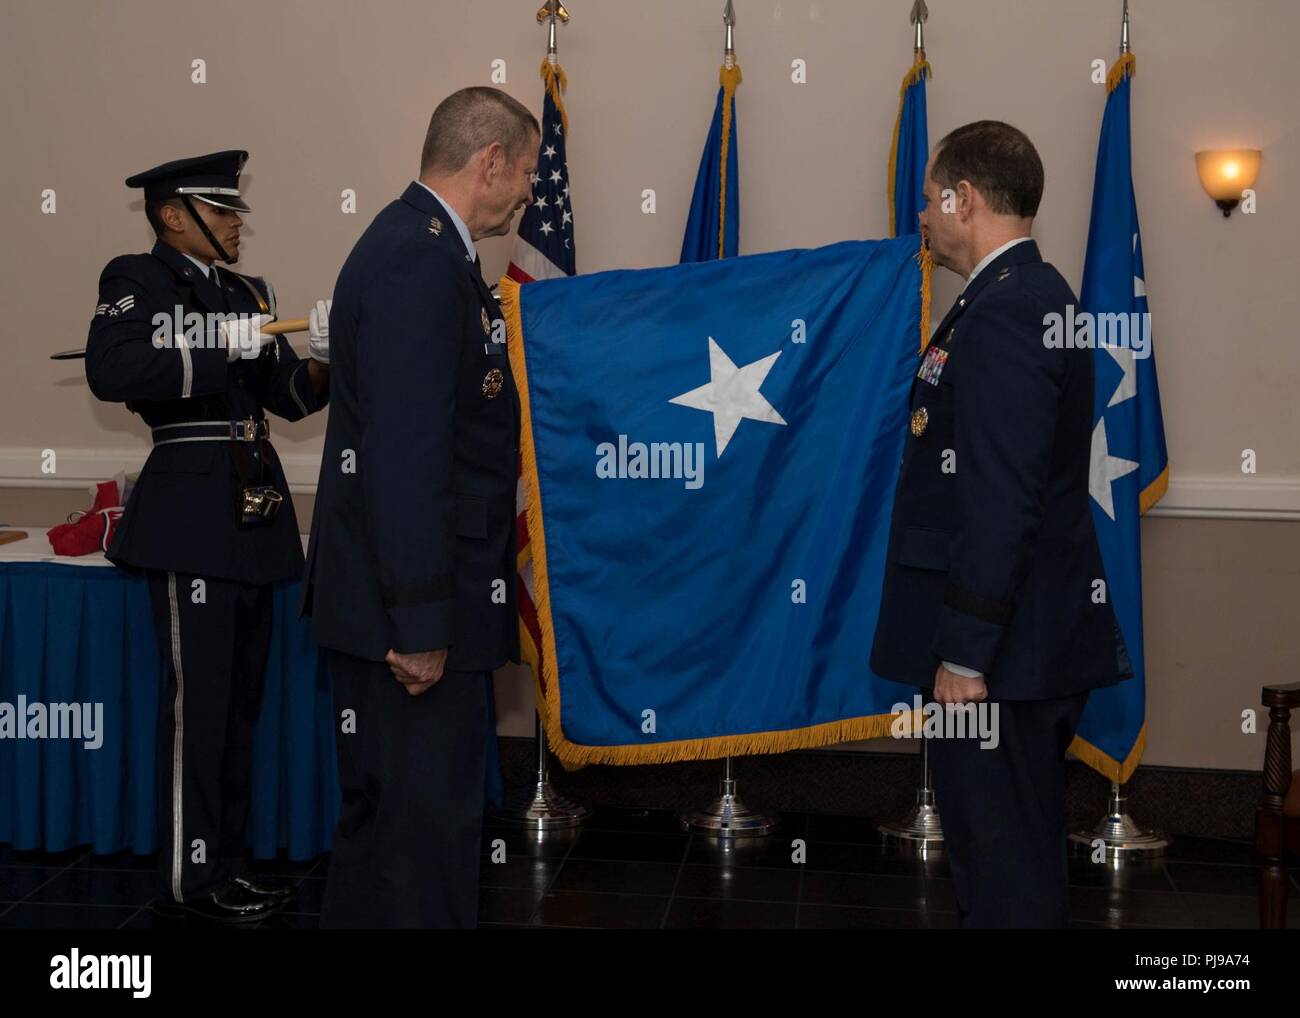 Brig. Gen. Eric H. Froehlich, Air Force Global Strike Command logistics, engineering and force protection director, promotes from the rank of Colonel to Brigadier General by Gen. Robin Rand, AFGSC commander, at Barksdale Air Force Base, La., July 6, 2018. Stock Photo